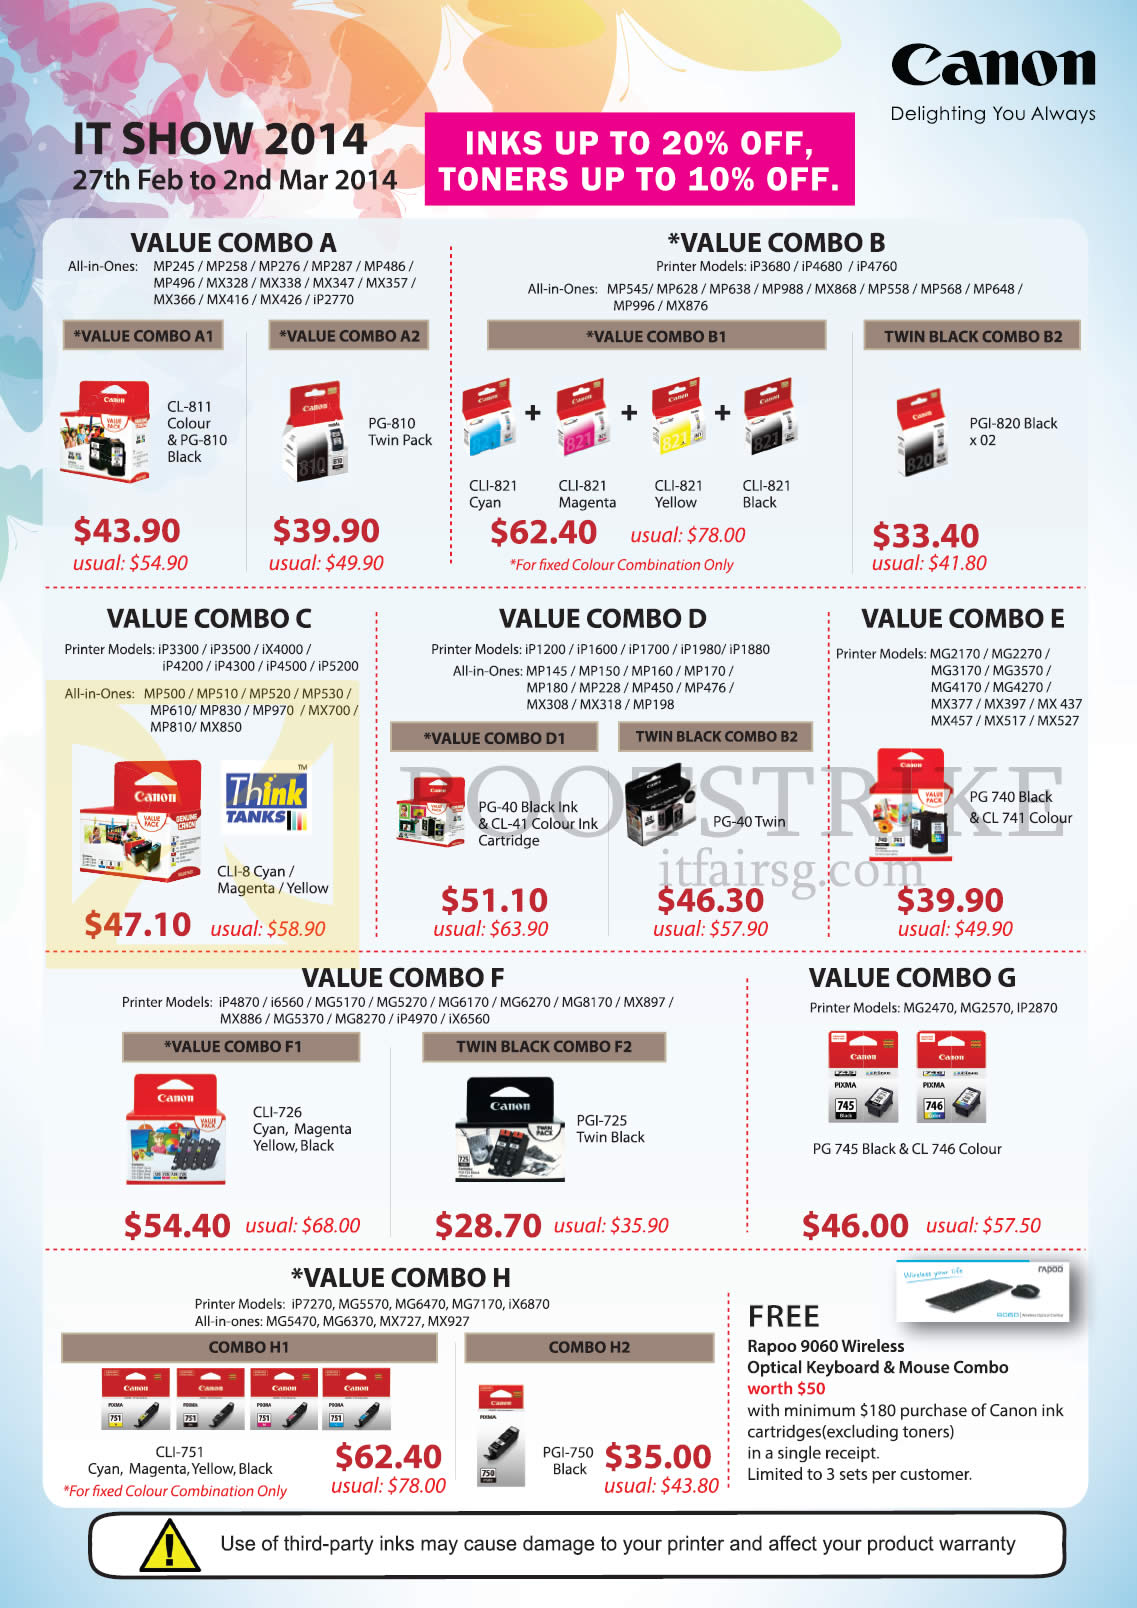 IT SHOW 2014 price list image brochure of Canon Ink, Toners Value Combos